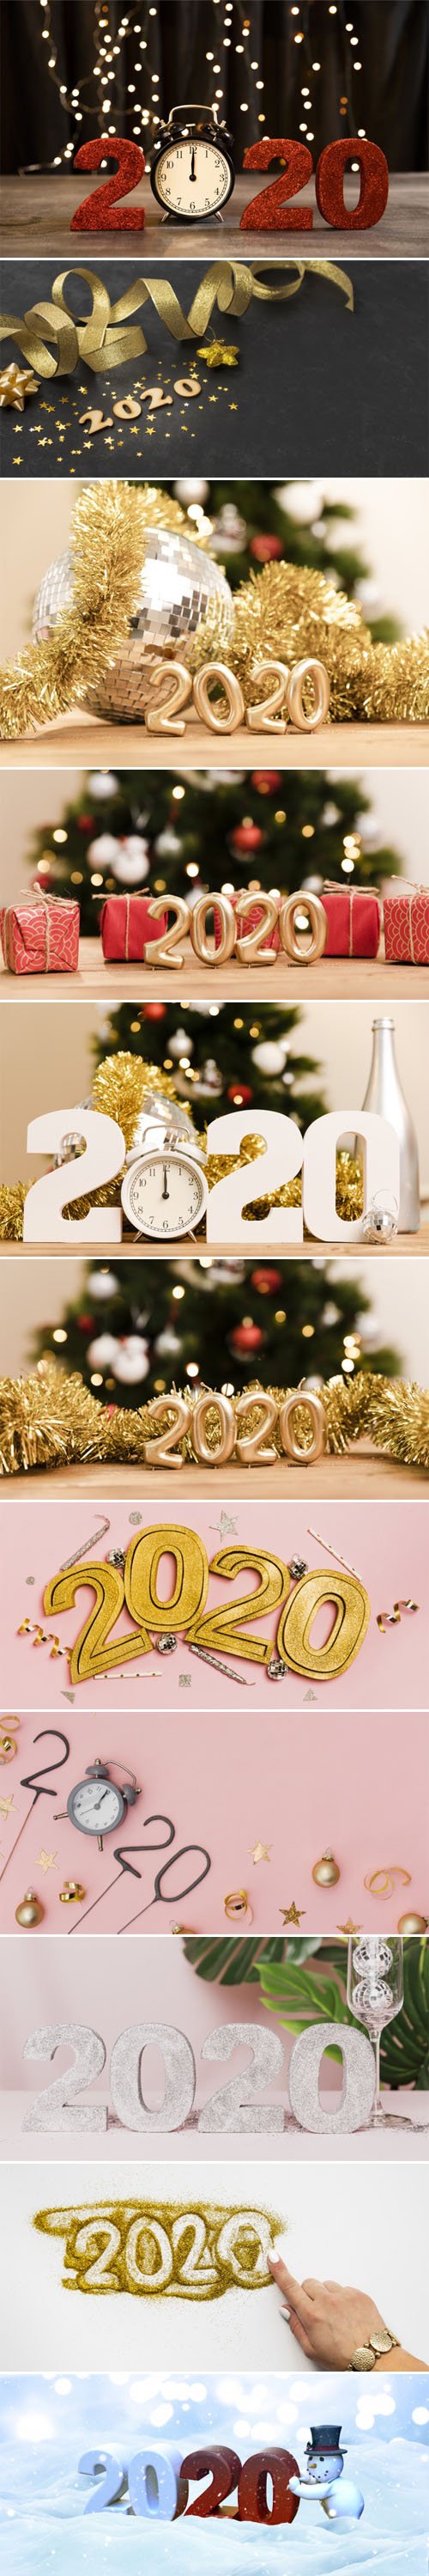 11 New Year 2020 Photos Collection